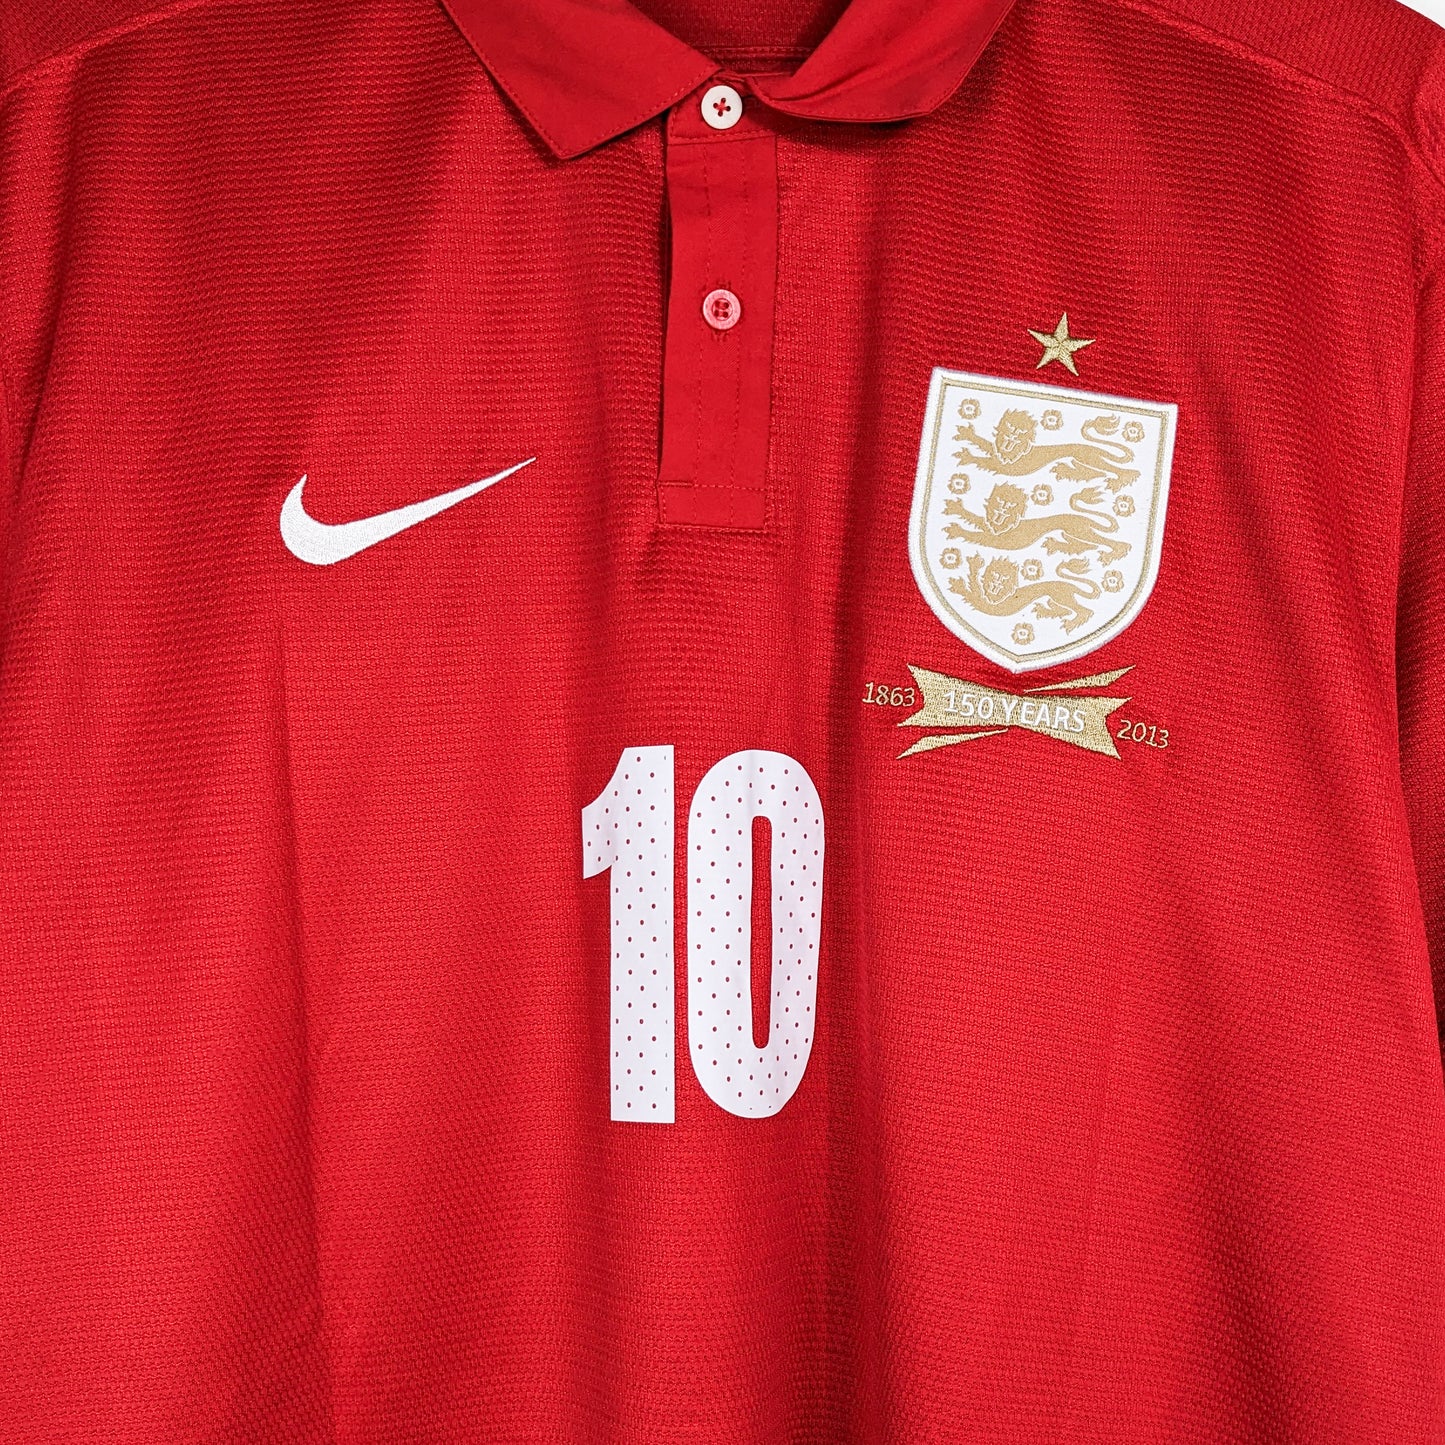 Authentic England 2013 Away - Rooney #10 Size L (Bnwt) (Anniversary 150th)